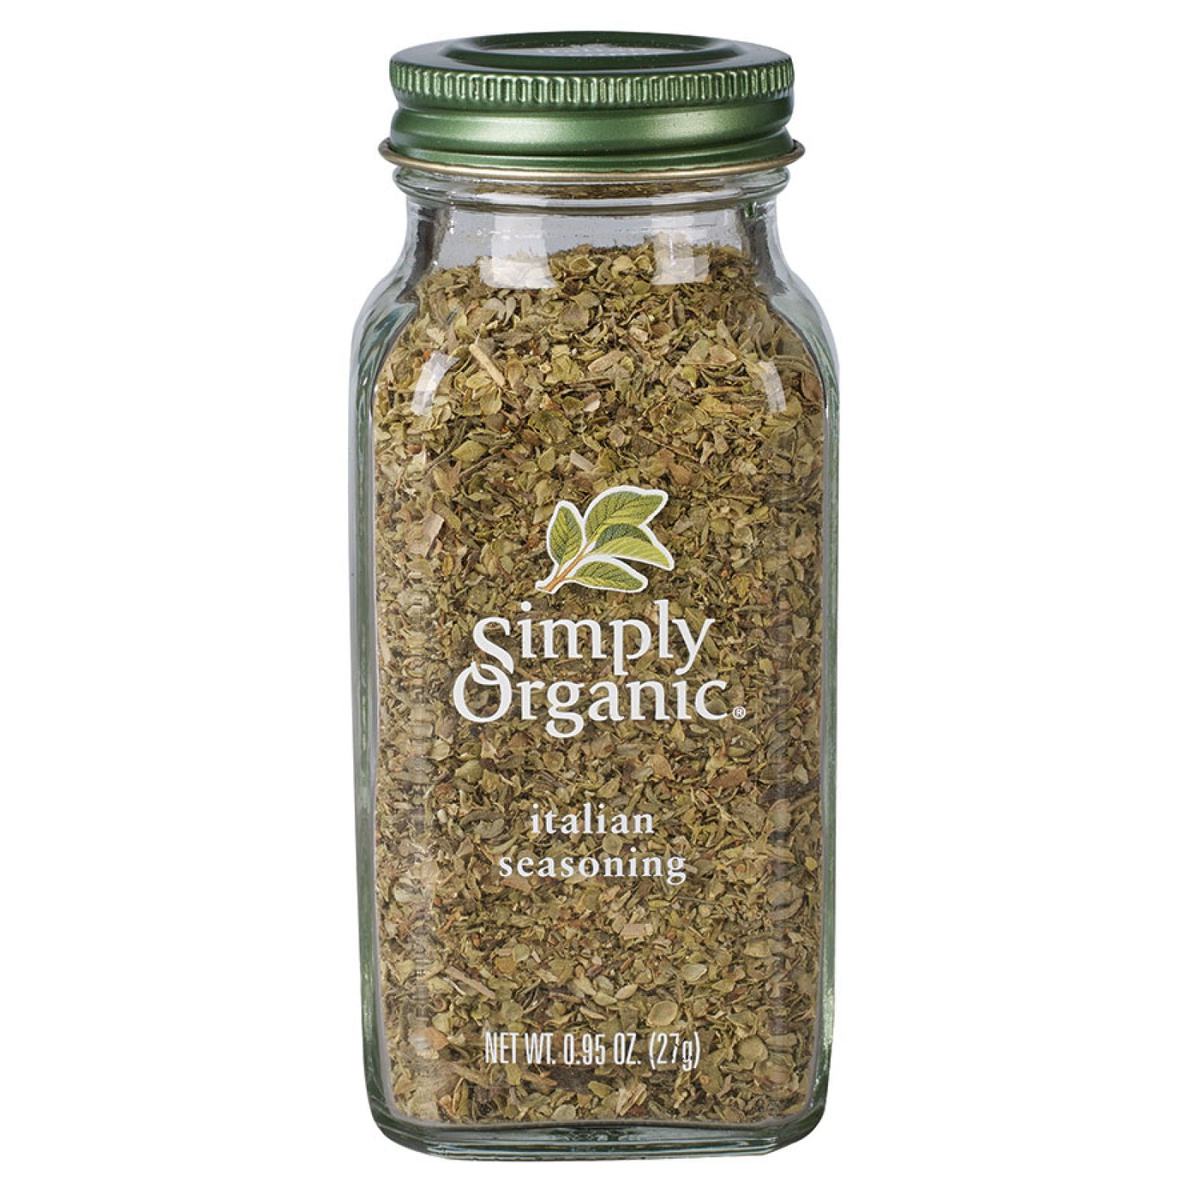 Organic herb seasoning jar on white background, perfect for enhancing the flavor of hamburger soup.